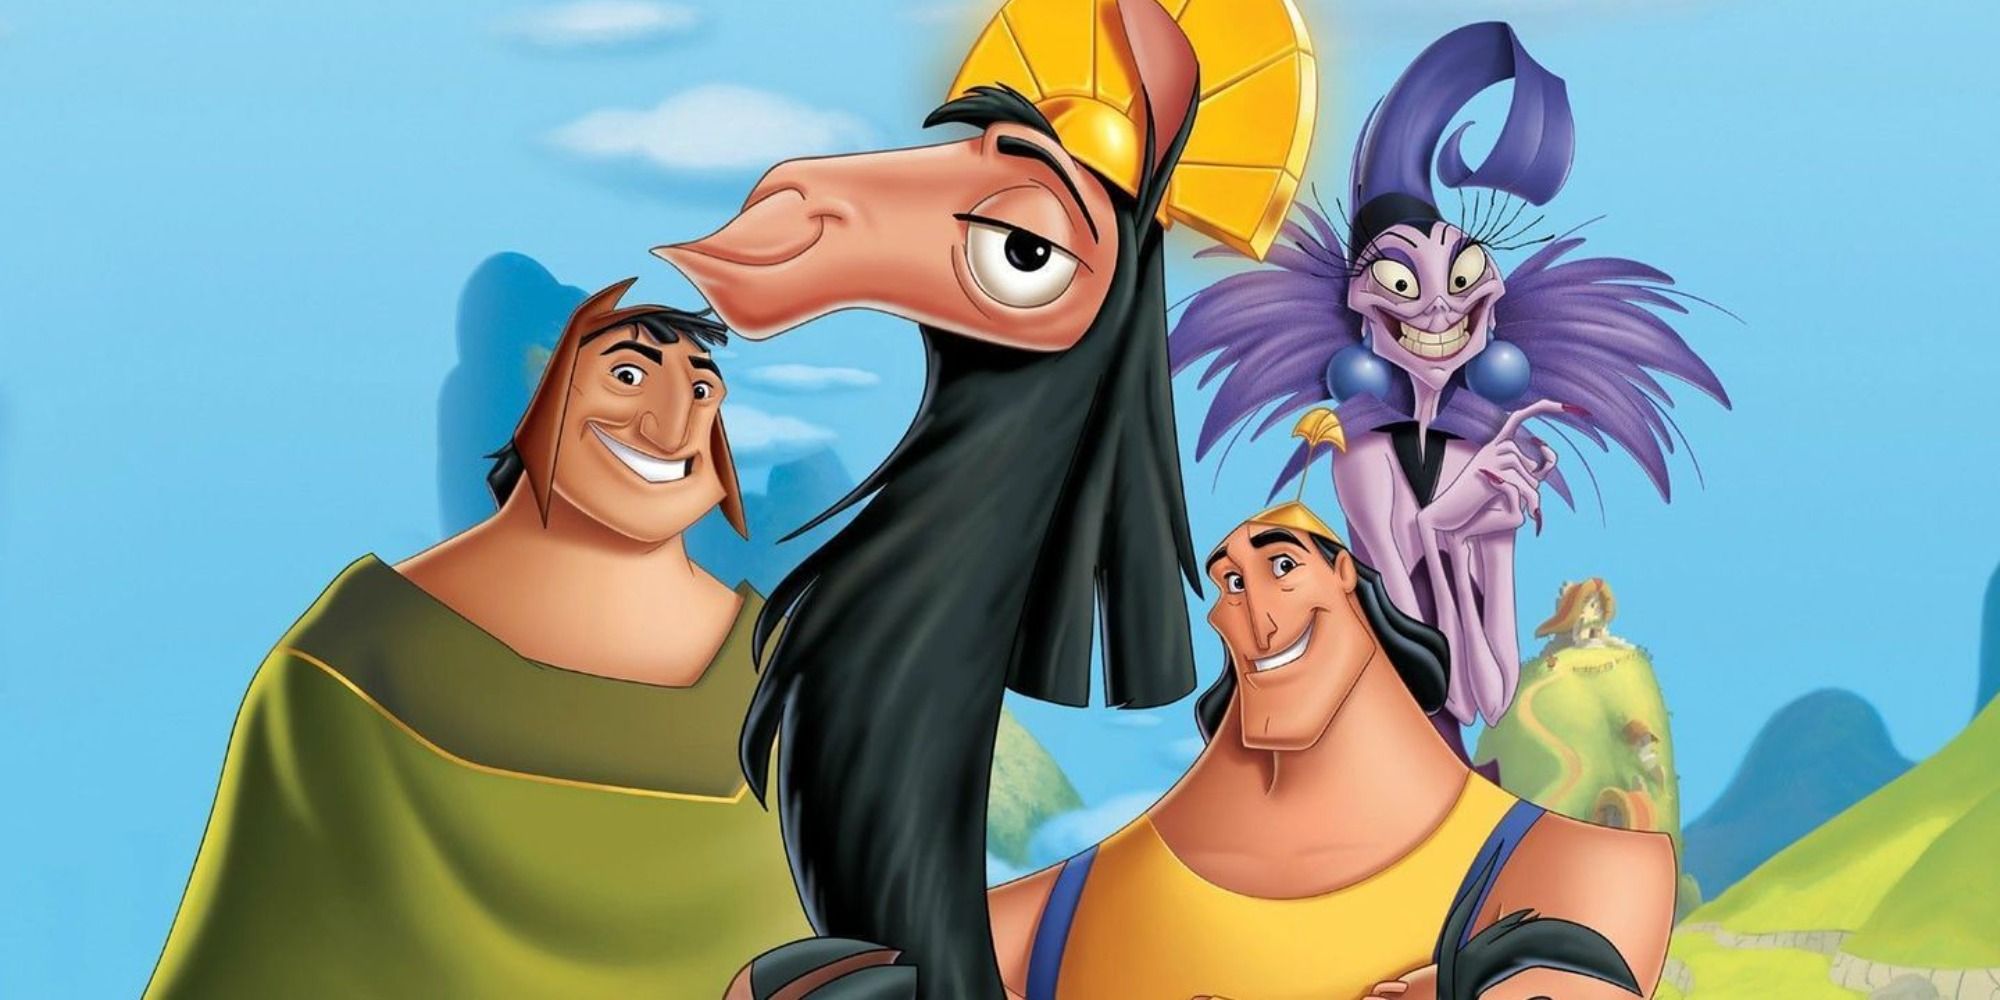 The cast of The Emperor's New Groove